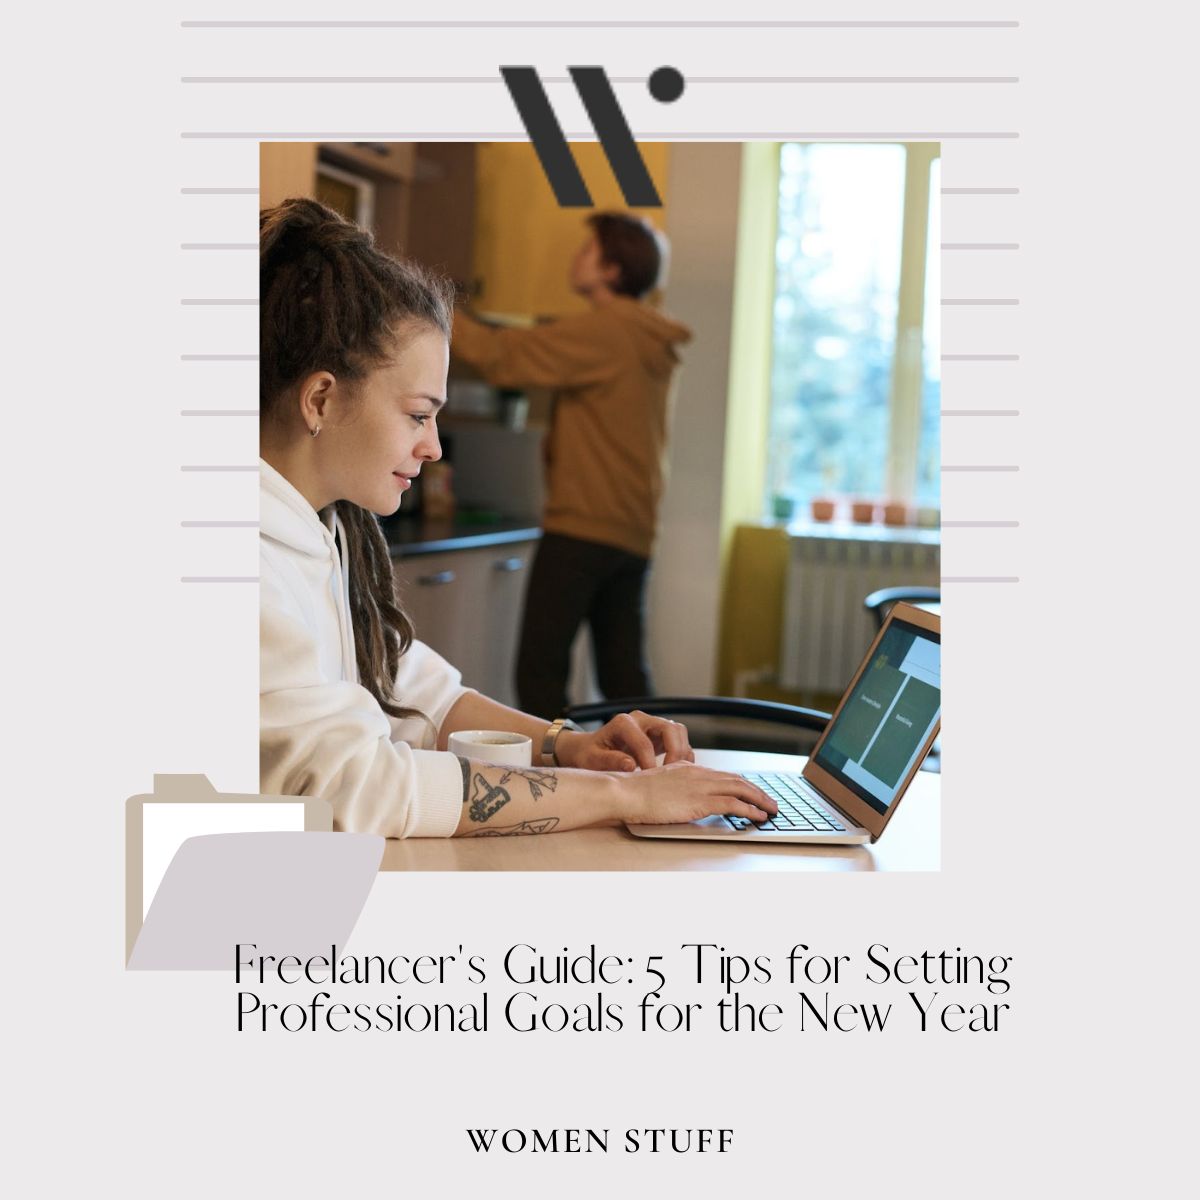 Freelancer's Guide 5 Tips for Setting Professional Goals for the New Year